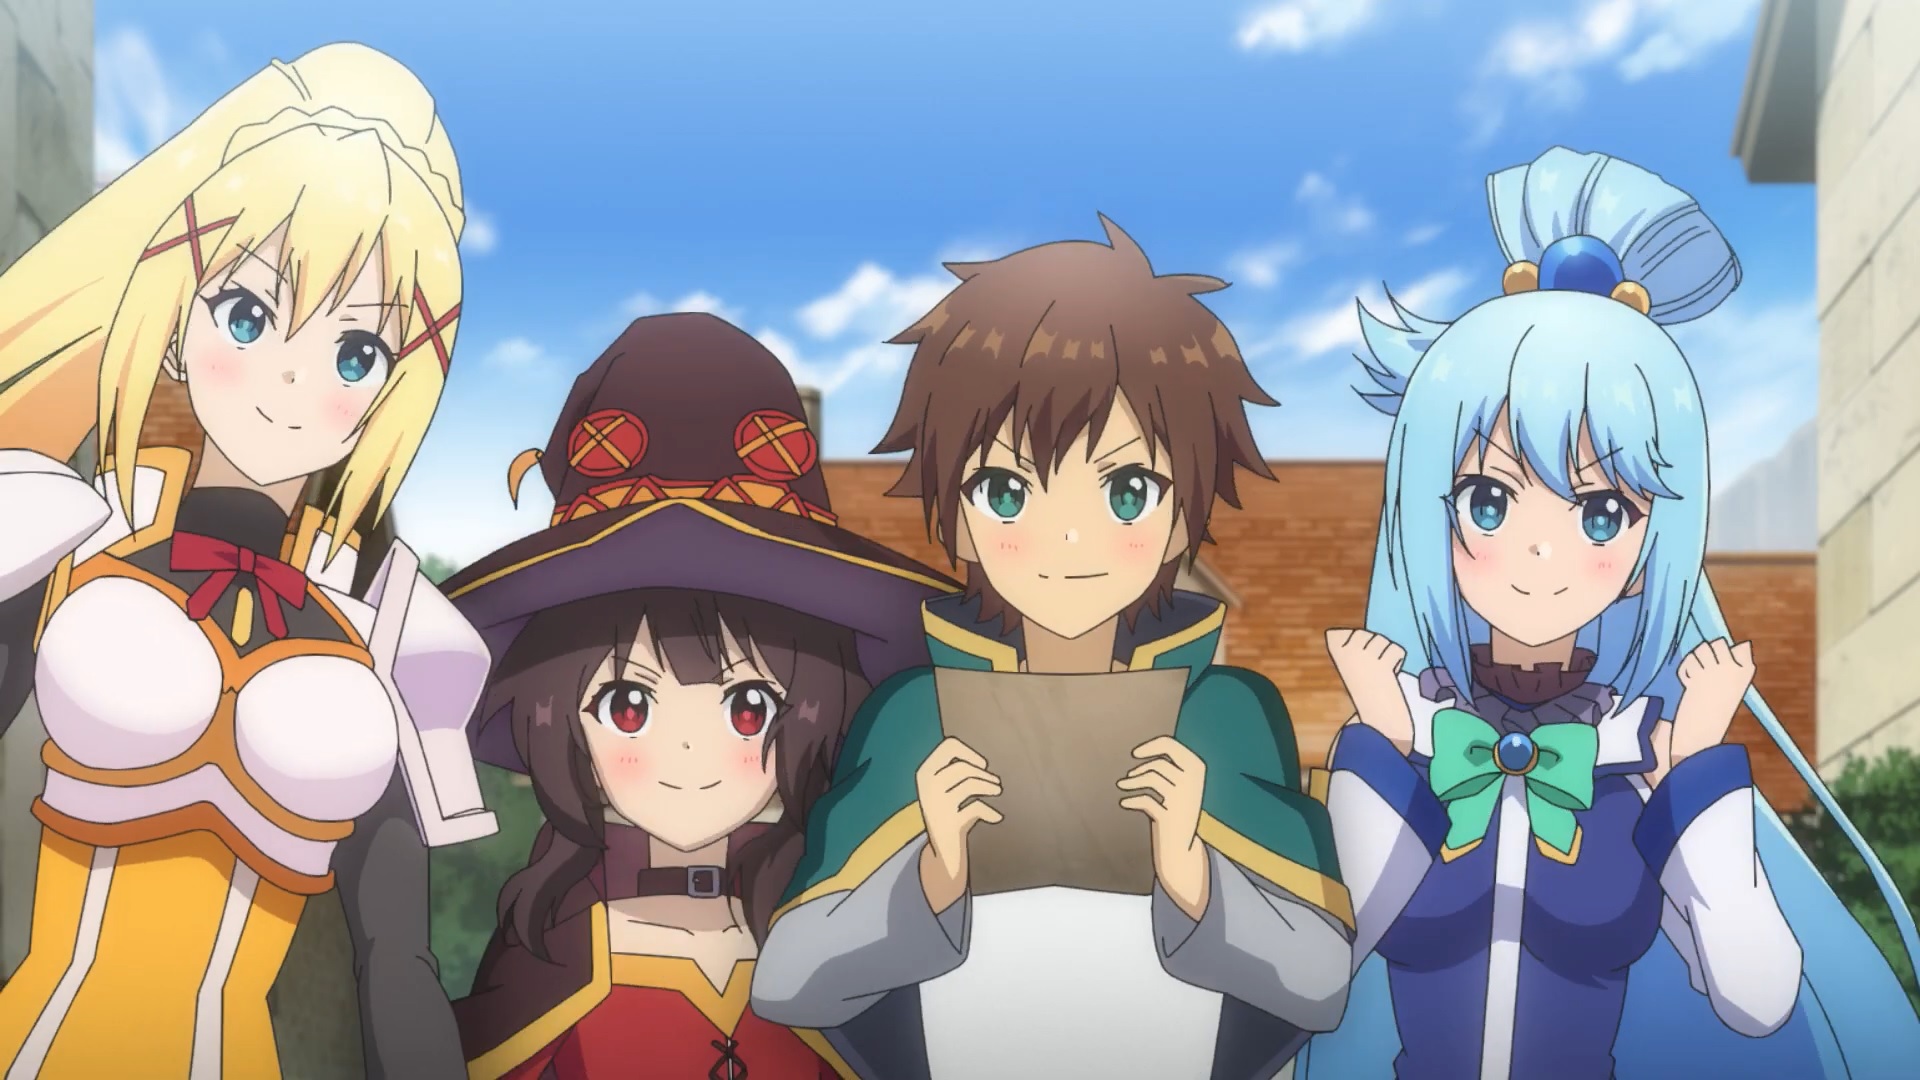 1920 X 1080] A wallpaper of the anime Konosuba I made. Took me 3 hours(  It's my first wallpaper)